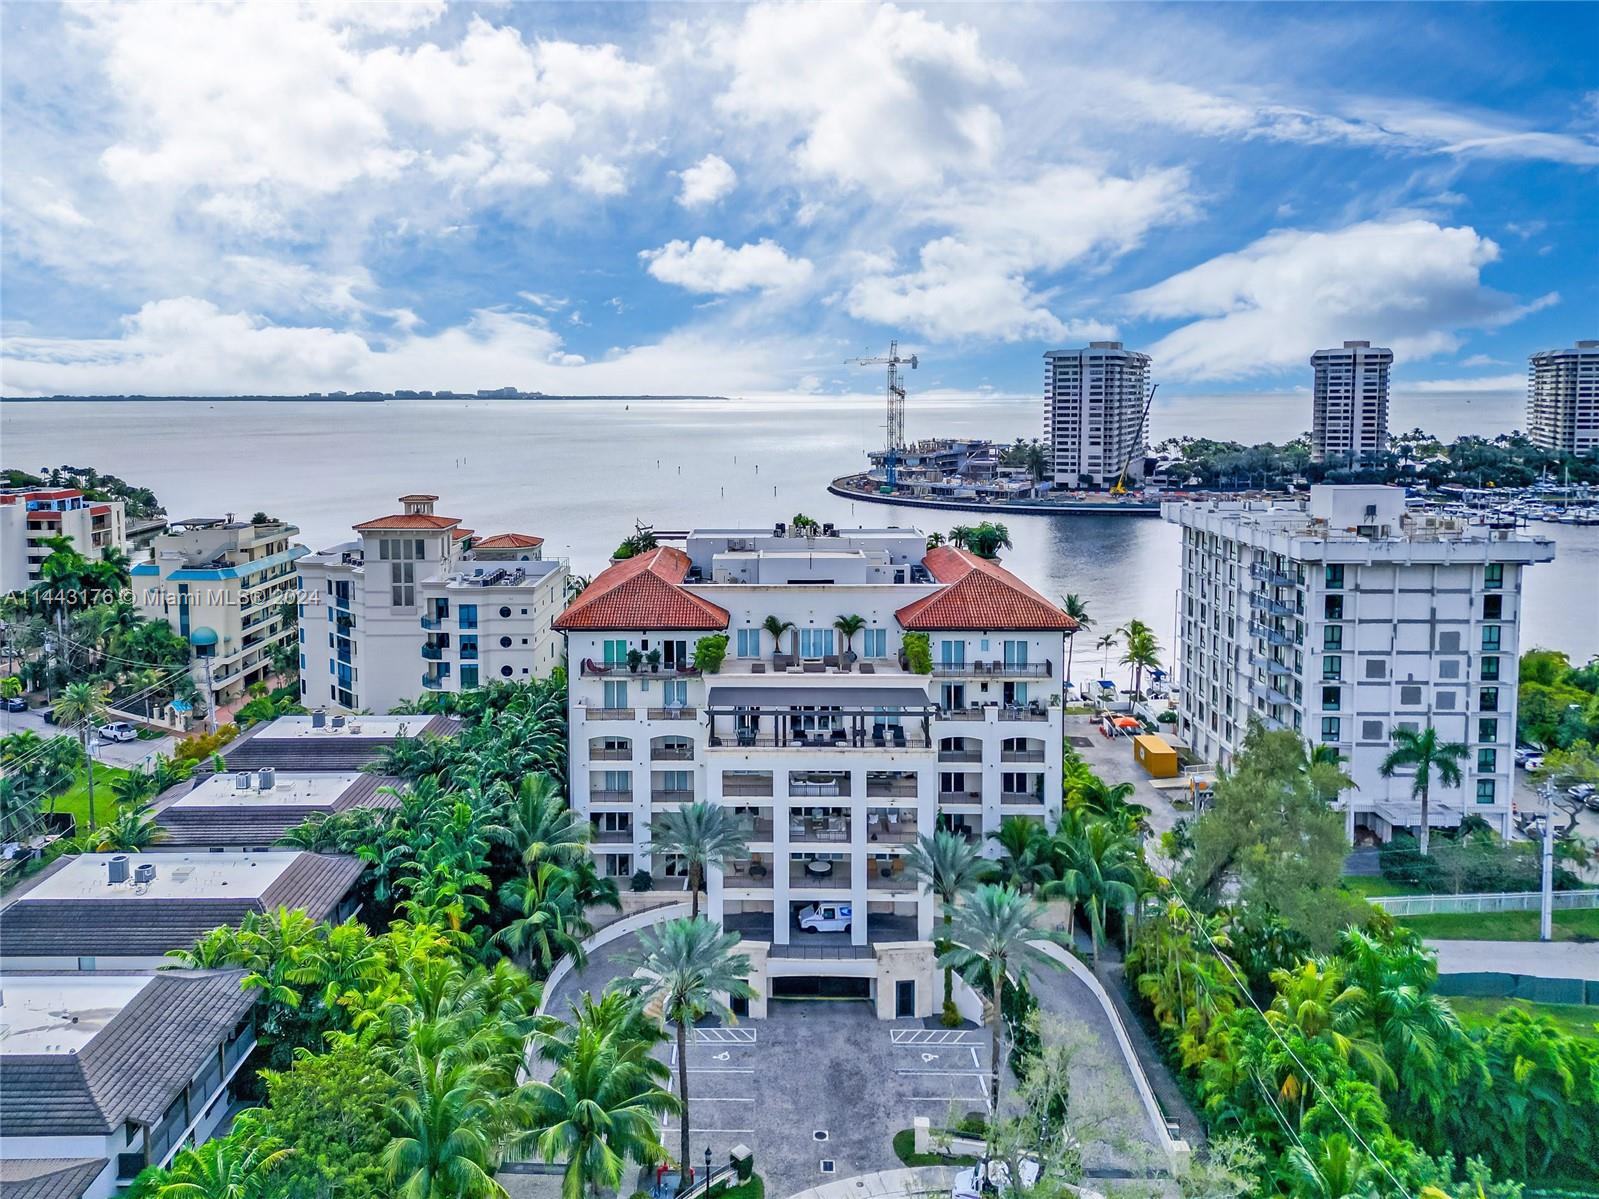 Private boutique building, unique unit w/spectacular water views of Biscayne Bay, total 18 private units in heart of Coconut Grove known as Residences at Vizcaya. Only unit for sale w/ boat slip included. Exclusive residence located on 2nd floor offers 4 bedrooms + maids quarters & 5.5 bathrooms, private elevator, foyer, open floor plan w/ high ceilings, European style kitchen, marble & dark wood floors throughout, family room, laundry room, spacious terrace w/ summer kitchen built in BBQ, one of the only units that features own private heated pool overlooking the bay.Covered parking garage 2parking spaces &2 car lifts. 24HR concierge, private marina, community lap pool, small gym. Pet friendly. Steele Mini park directly downstairs. Walkability & bike trails near.Next to HCA Mercy Hospital